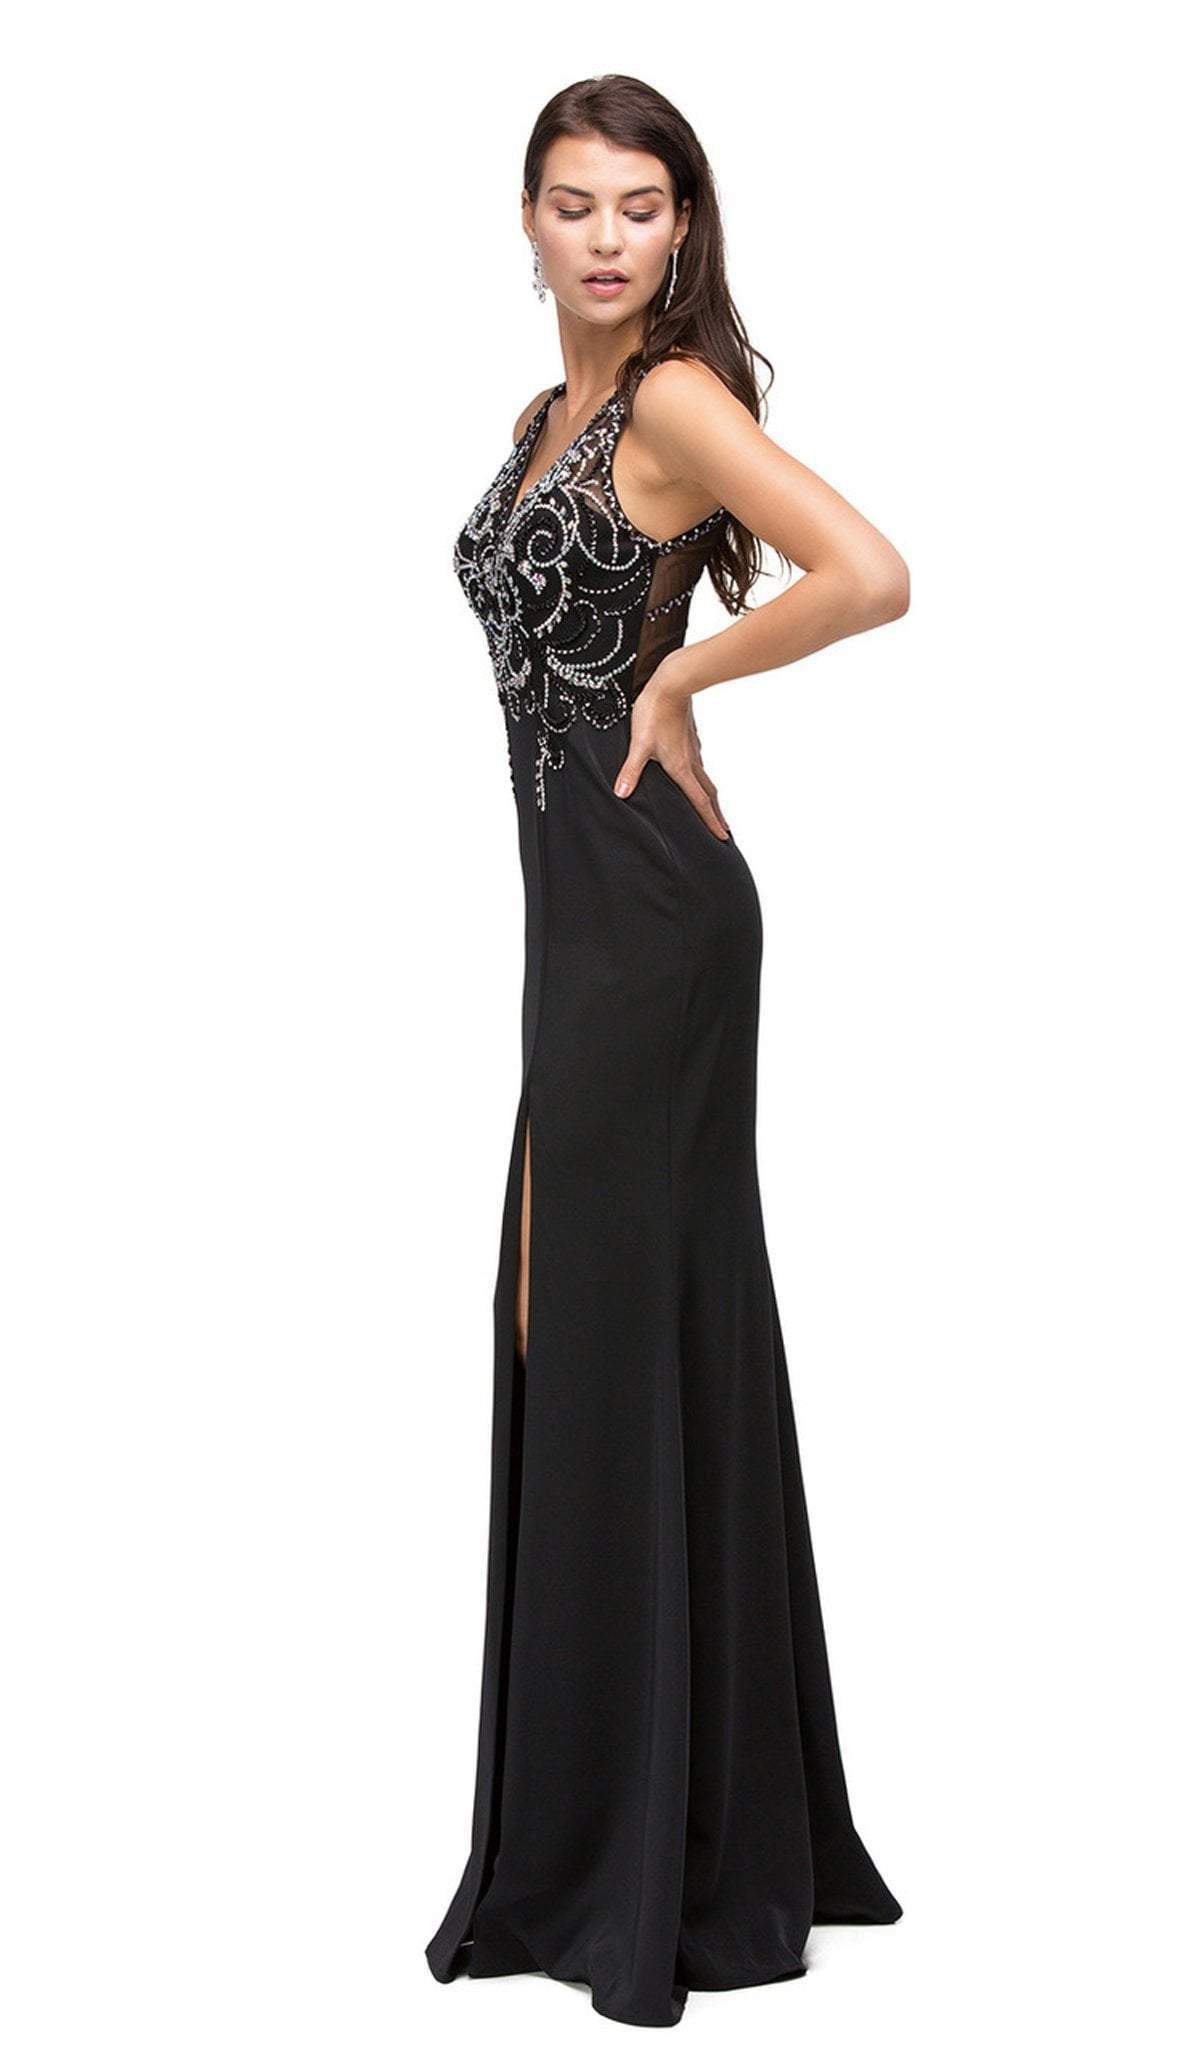 Dancing Queen - 9704 V-Neck Beaded Bodice Illusion Back Long Prom Dress Special Occasion Dress XS / Black